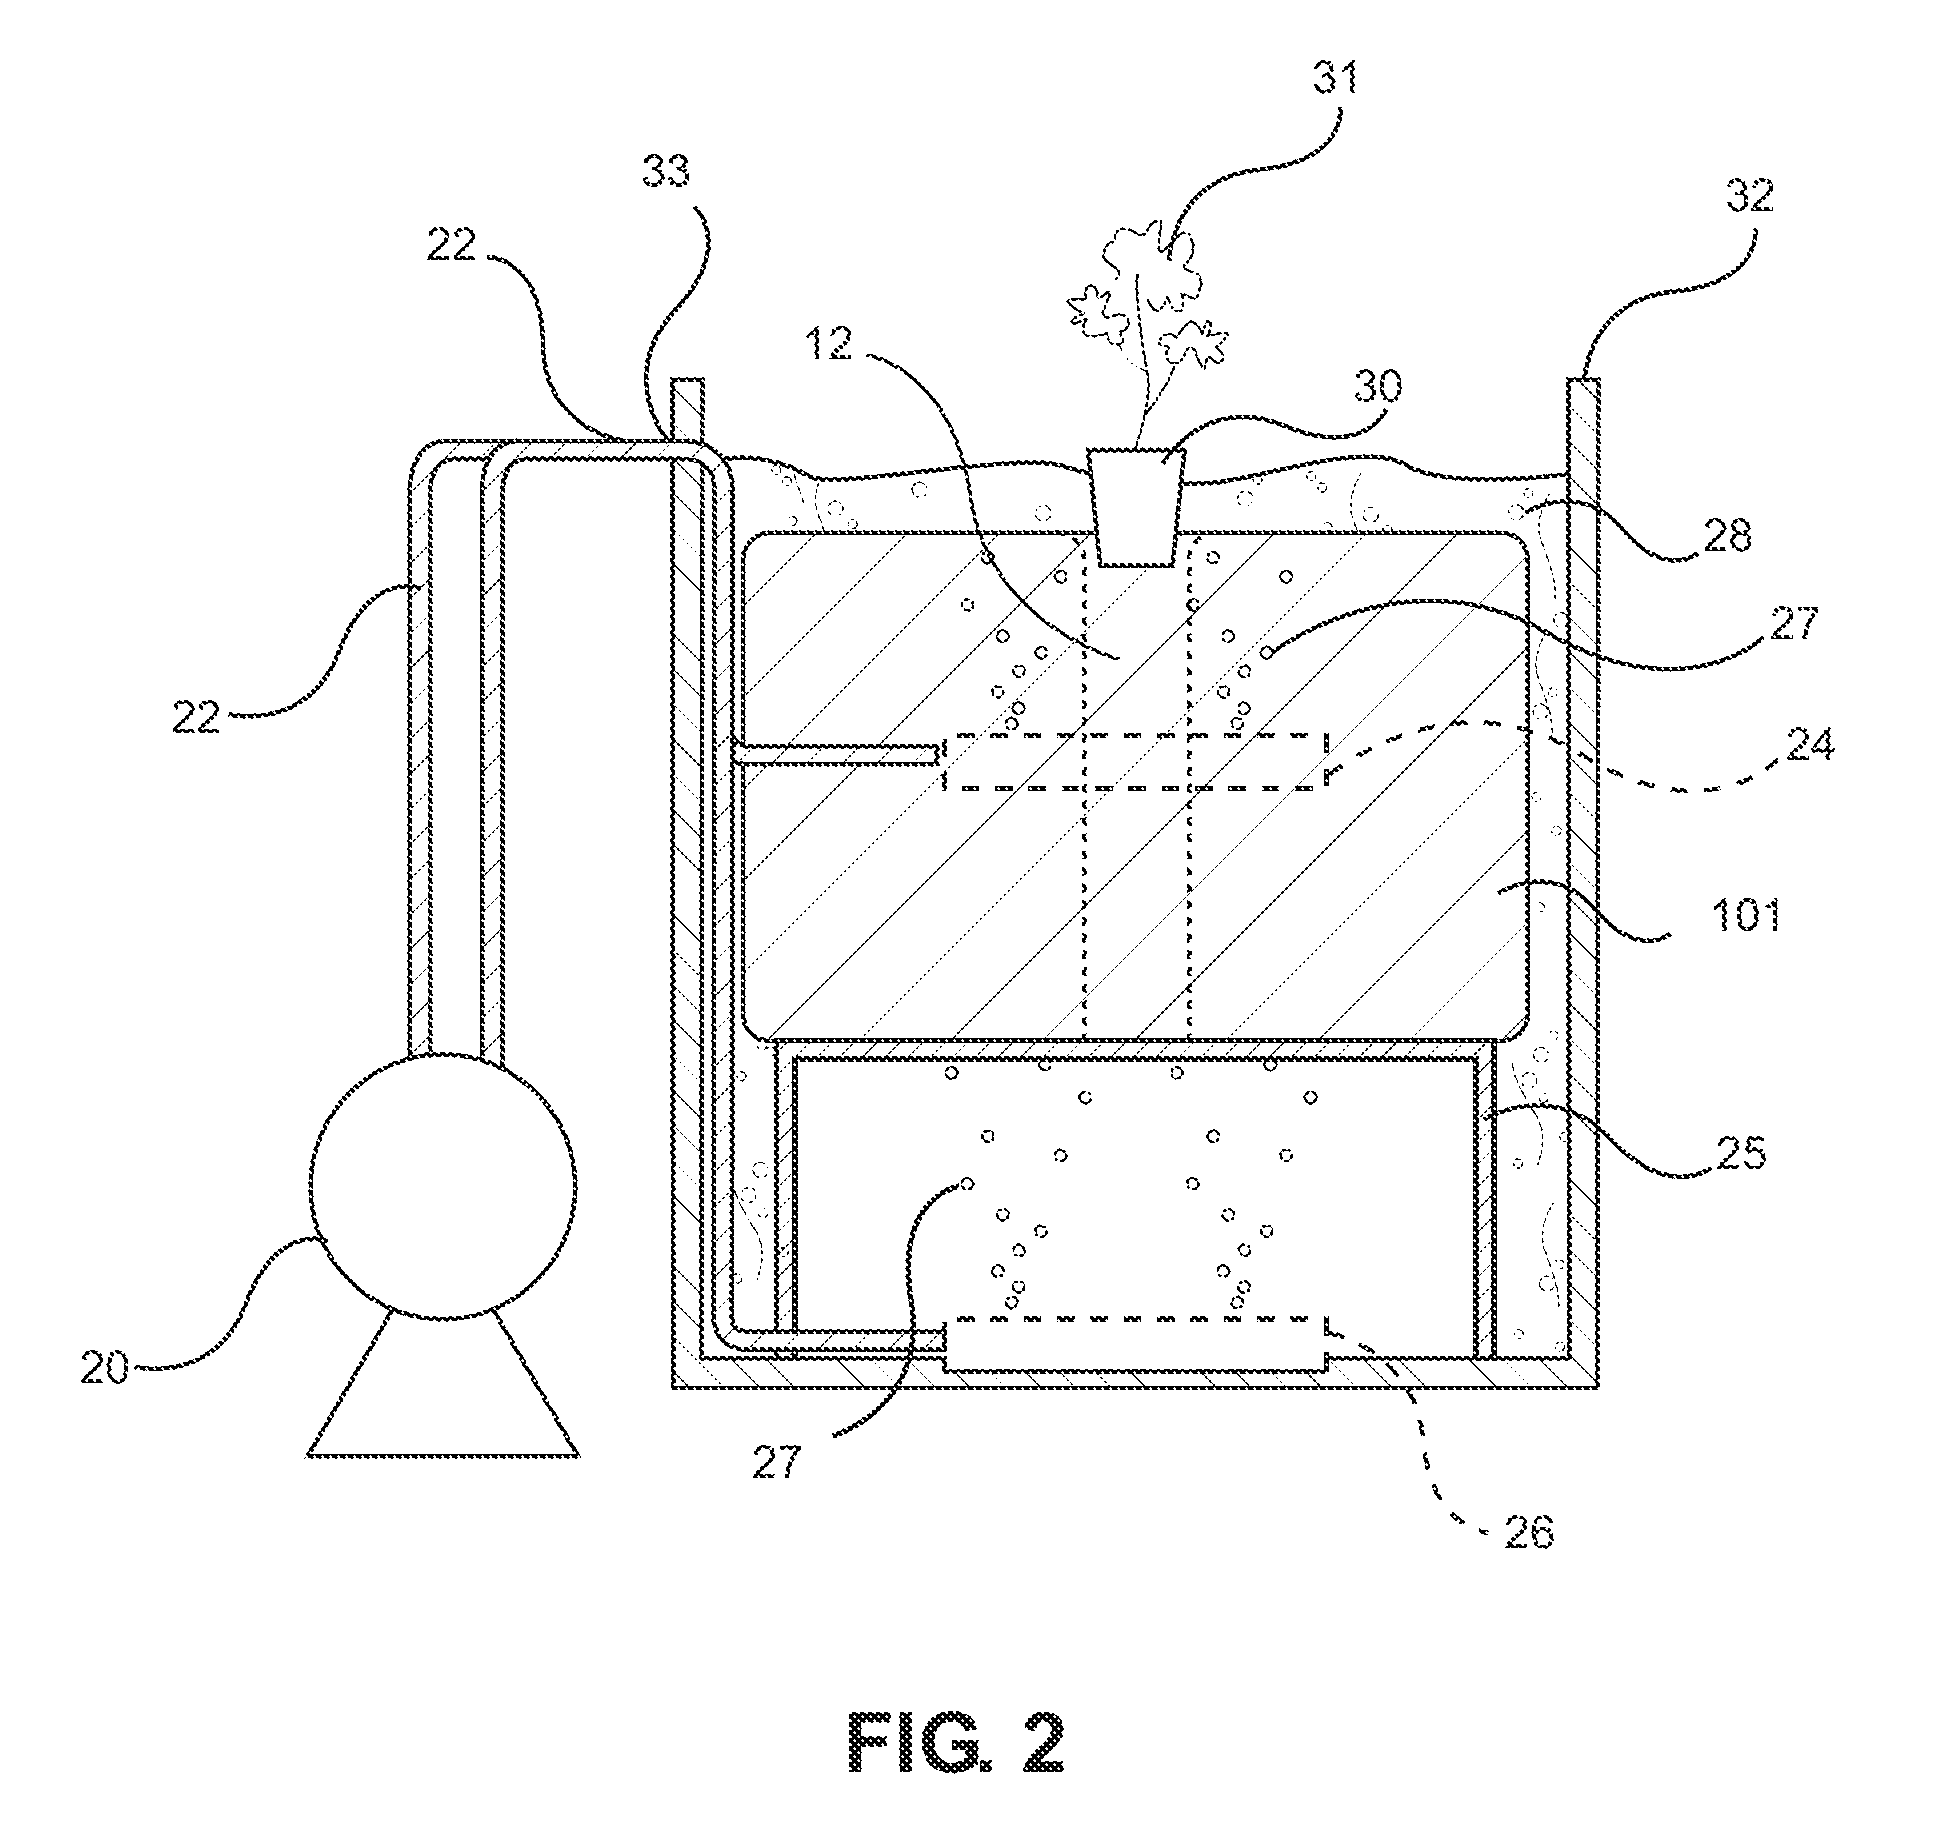 Plant growing apparatus, systems and methods